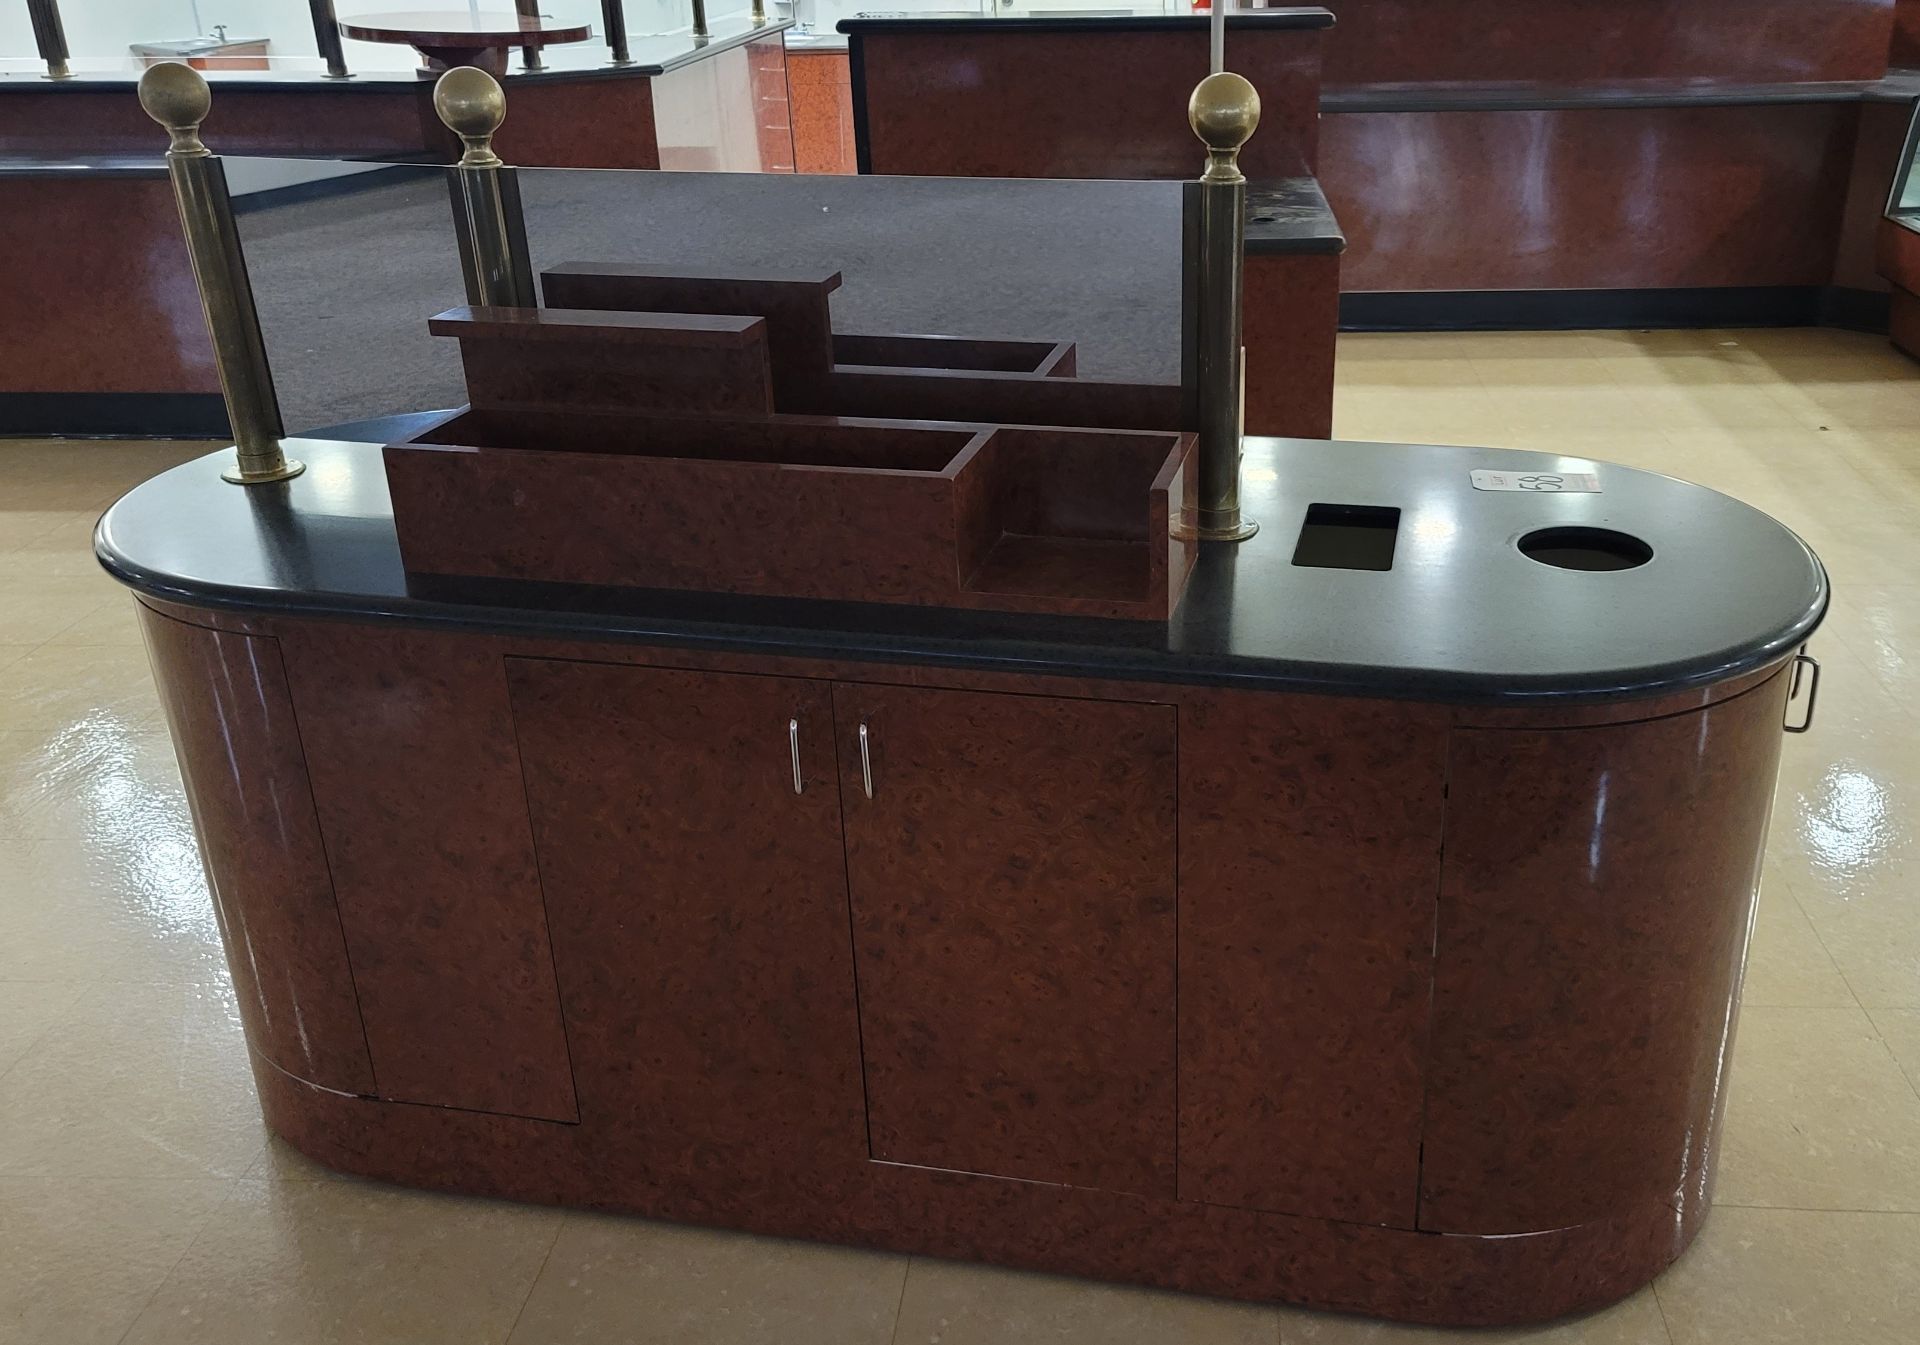 RESTAURANT CONDIMENT ISLAND W/ TRASH RECEPTACLE AND SUPPLY STORAGE, 7' X 32", 34" COUNTER HEIGHT - Image 2 of 2